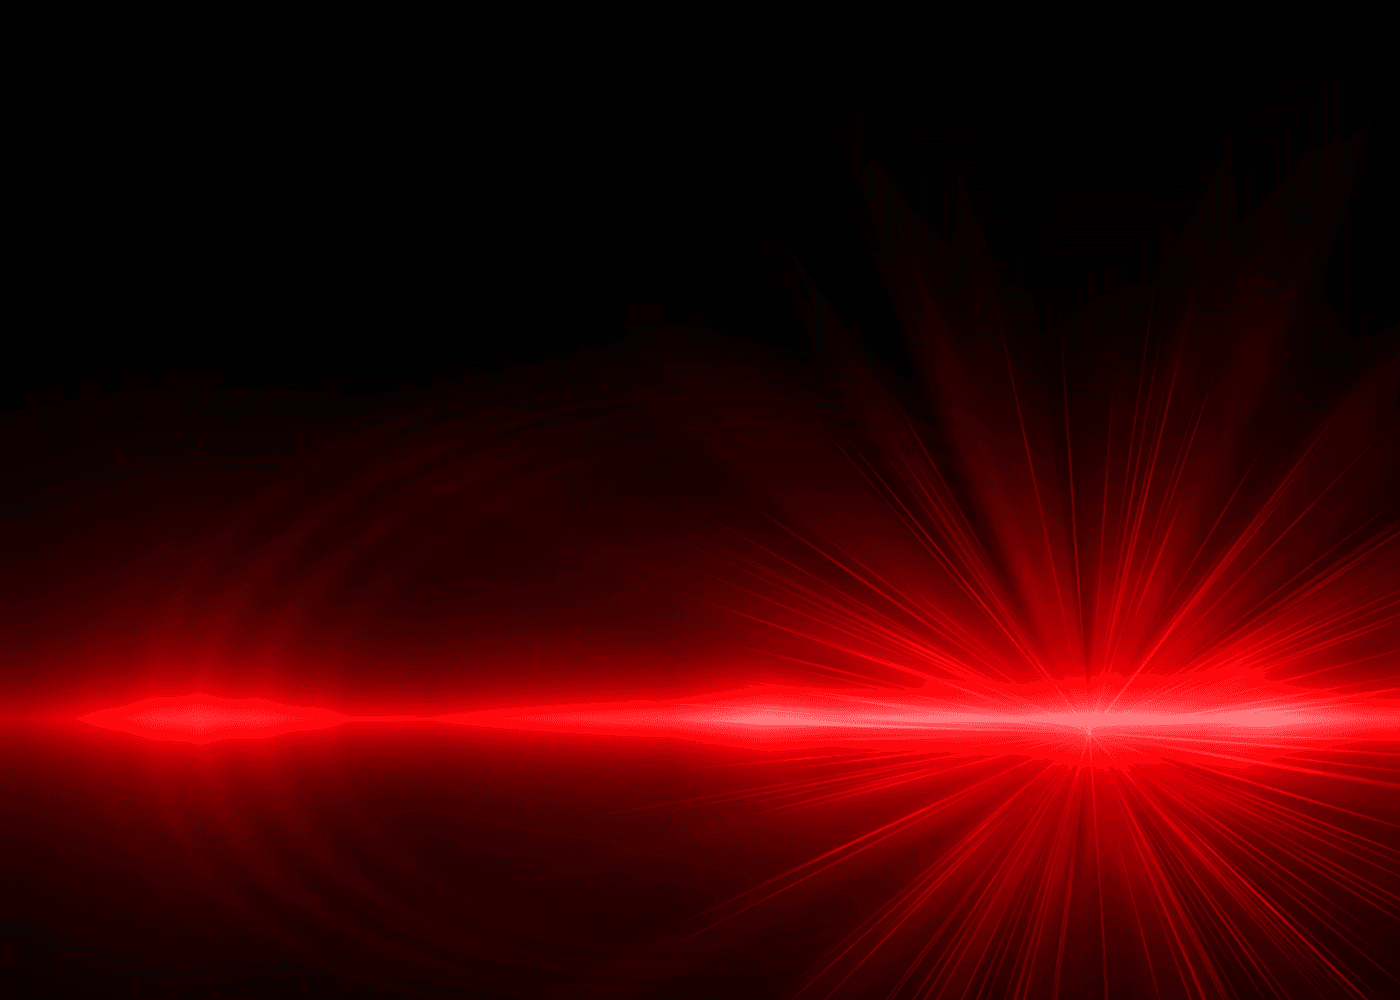 View of a red laser light